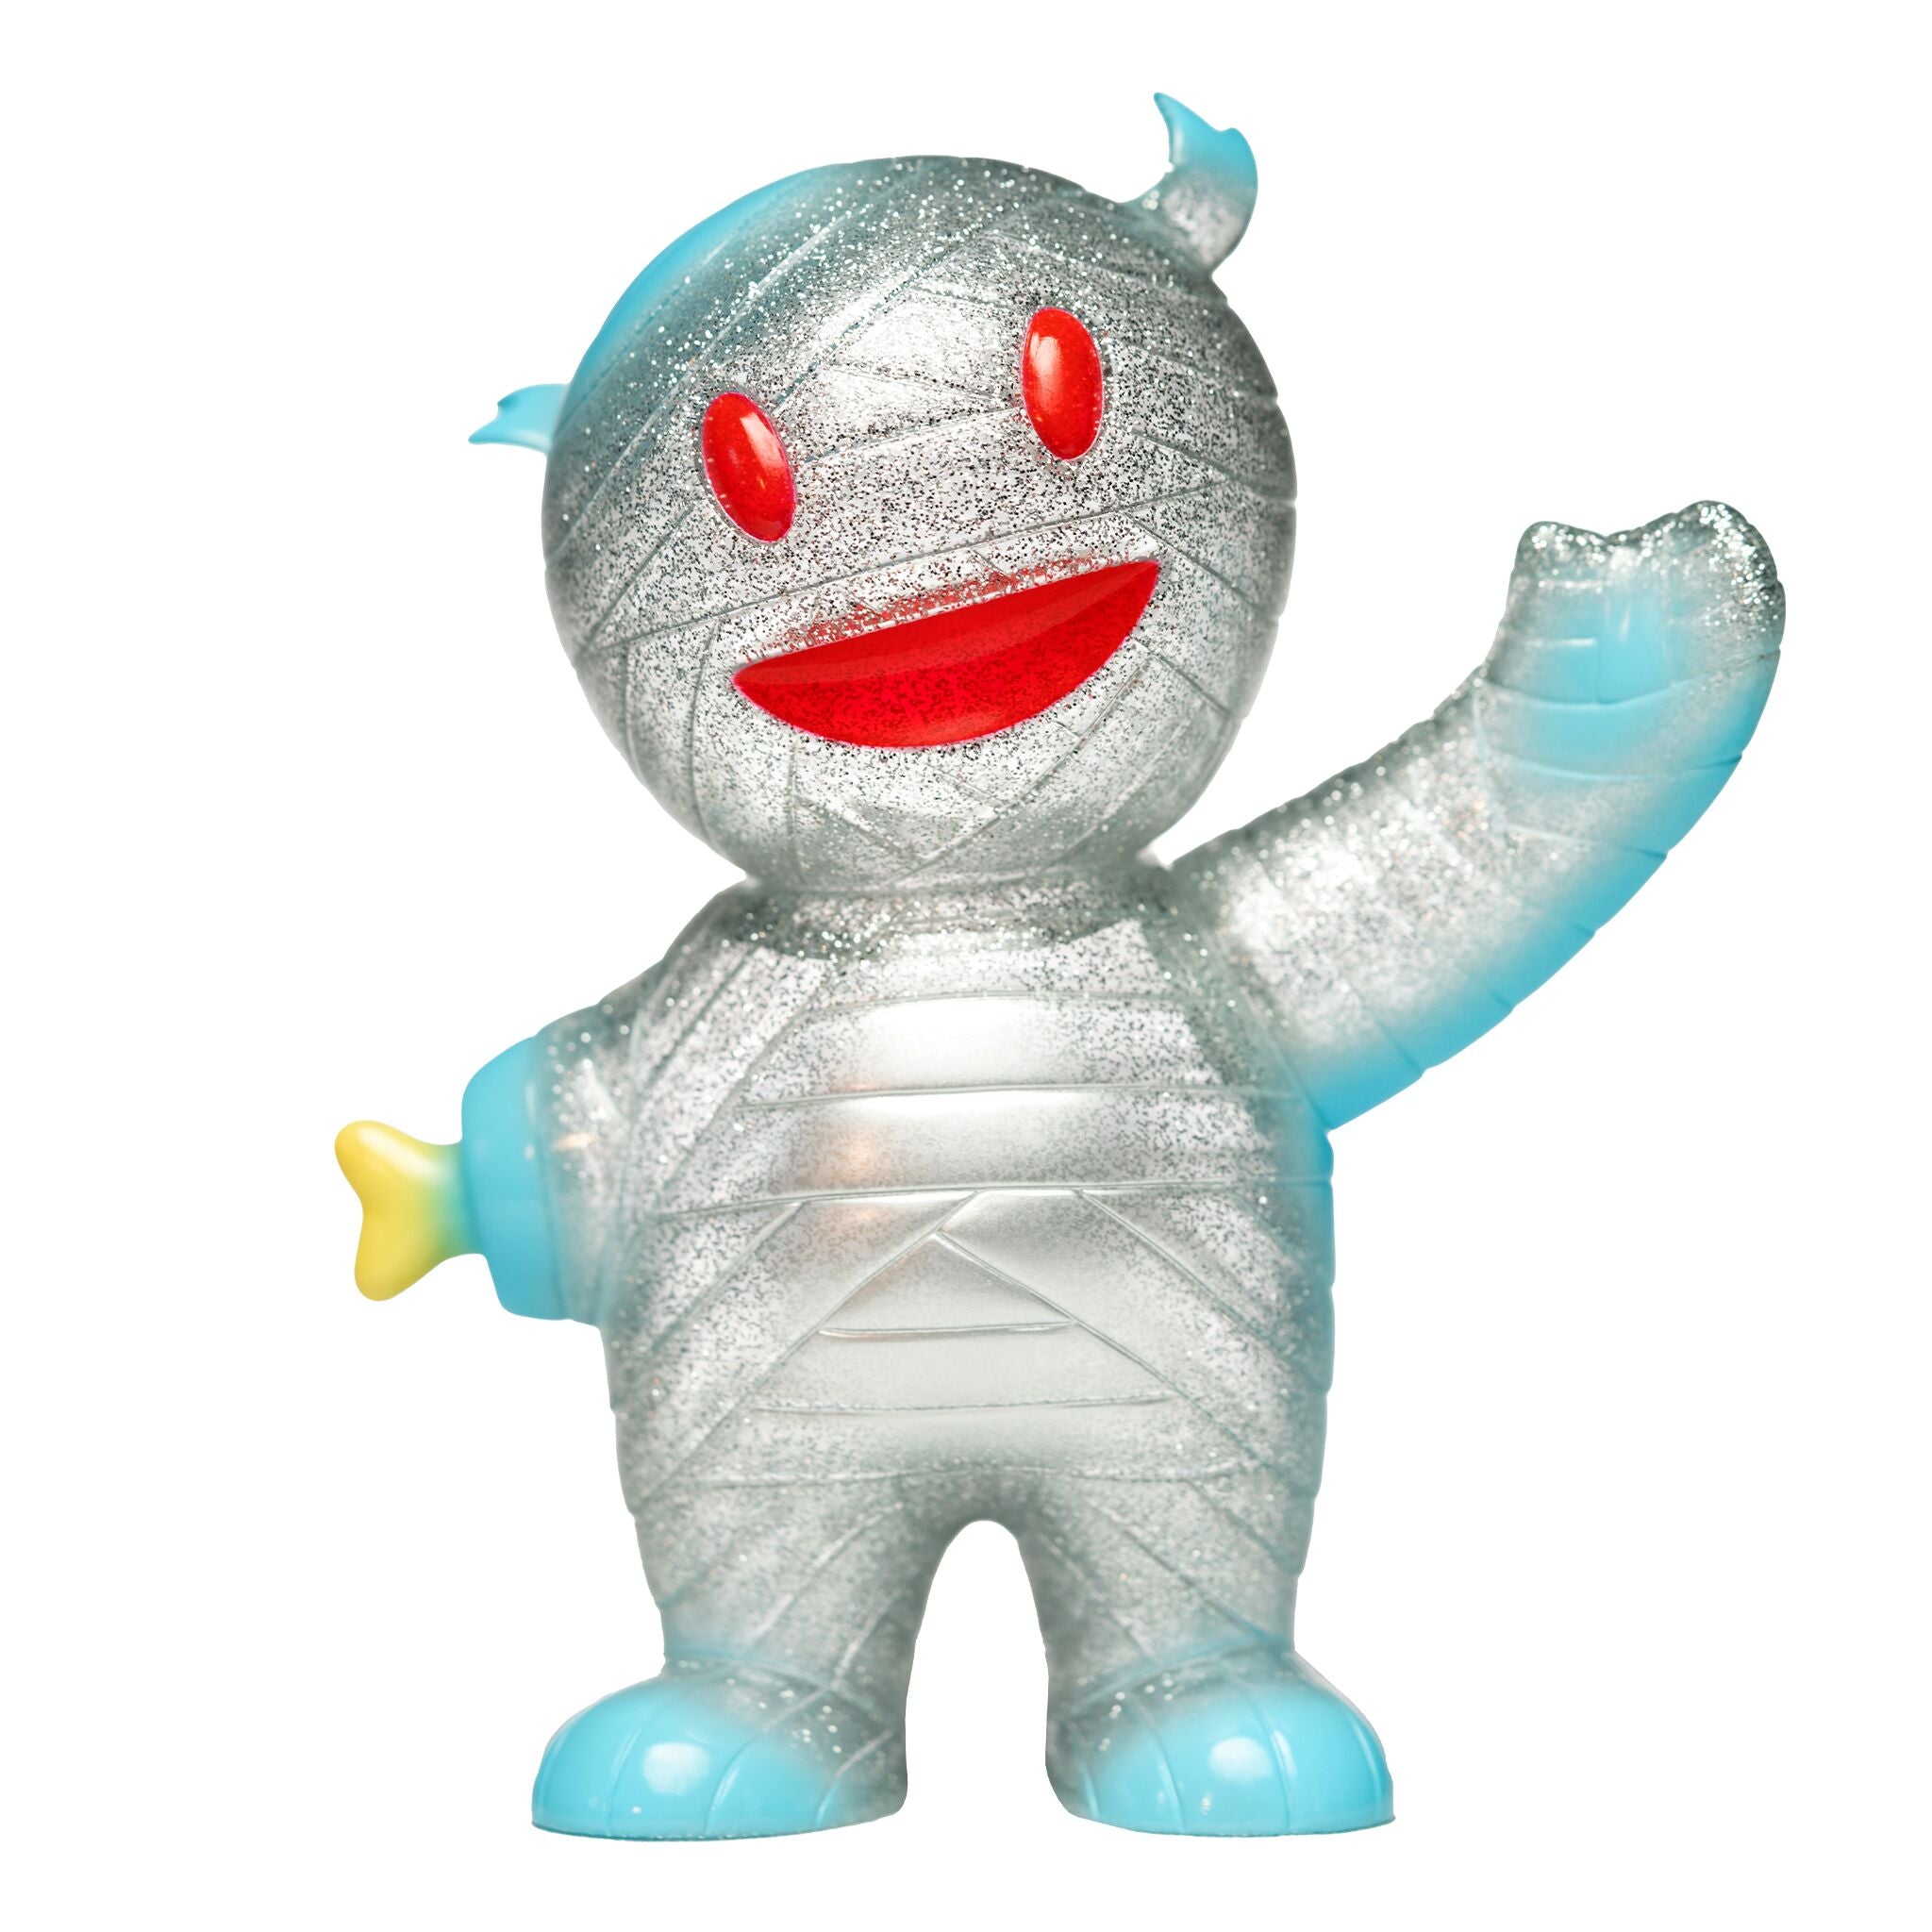 Super7 Japanese Vinyl - Mascots - Mummy Boy (Outerspaced)